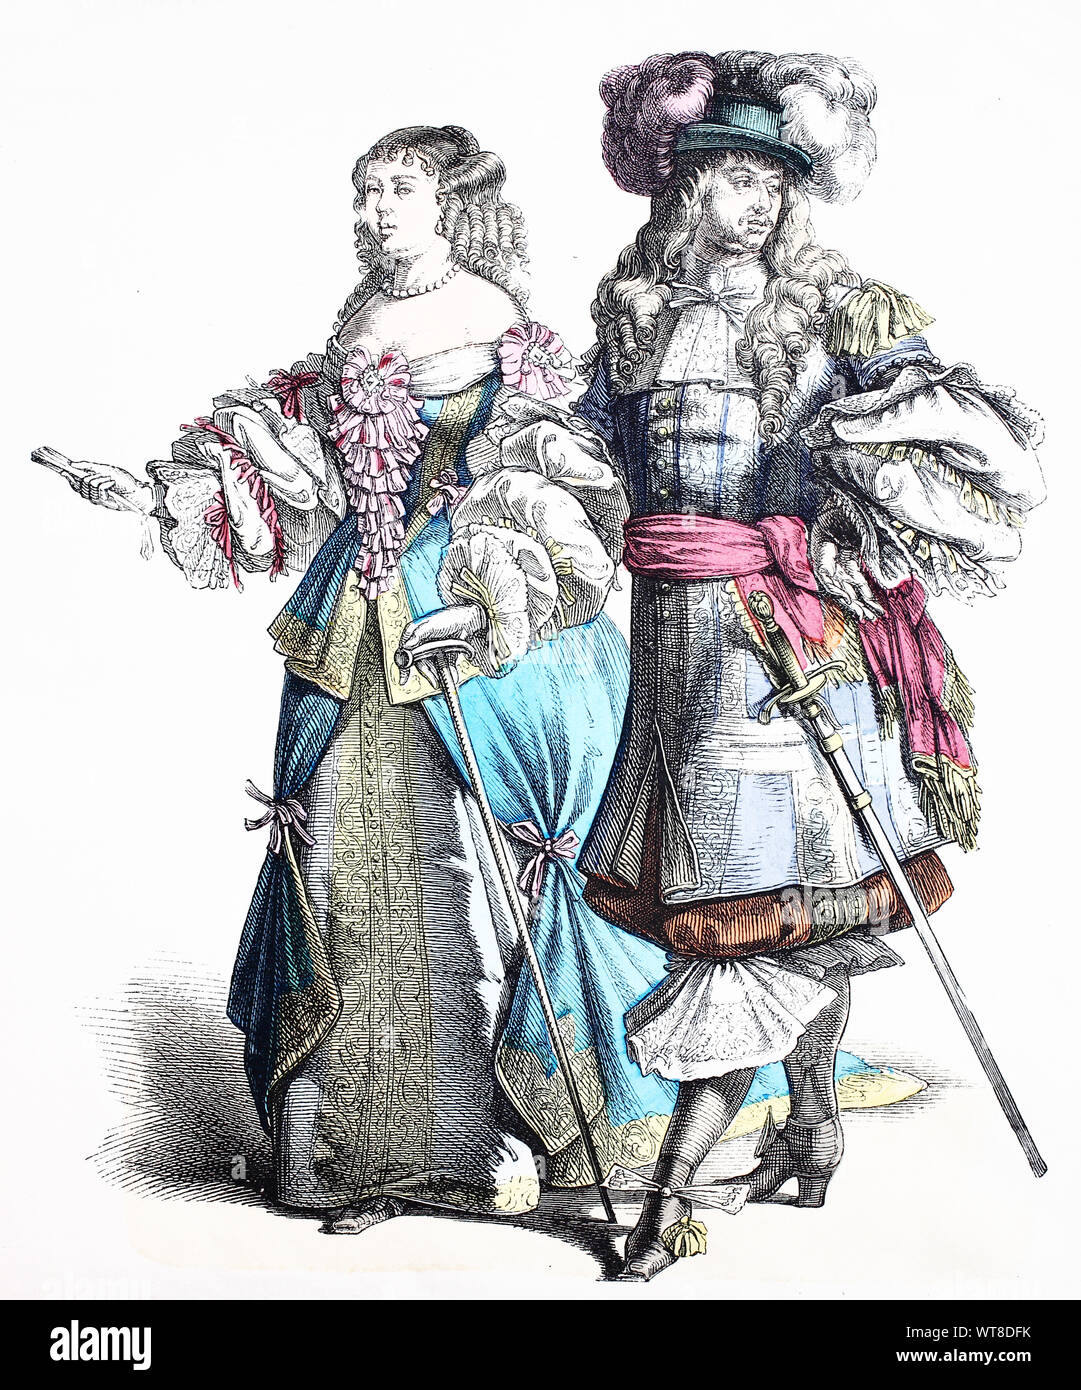 National costume, clothes, history of the costumes, French aristocrats in  court national costume, approx. in 1630-1600, Volkstracht, Kleidung,  Geschichte der Kostüme, Französische Adelige in Hoftracht, ca 1630-1600  Stock Photo - Alamy